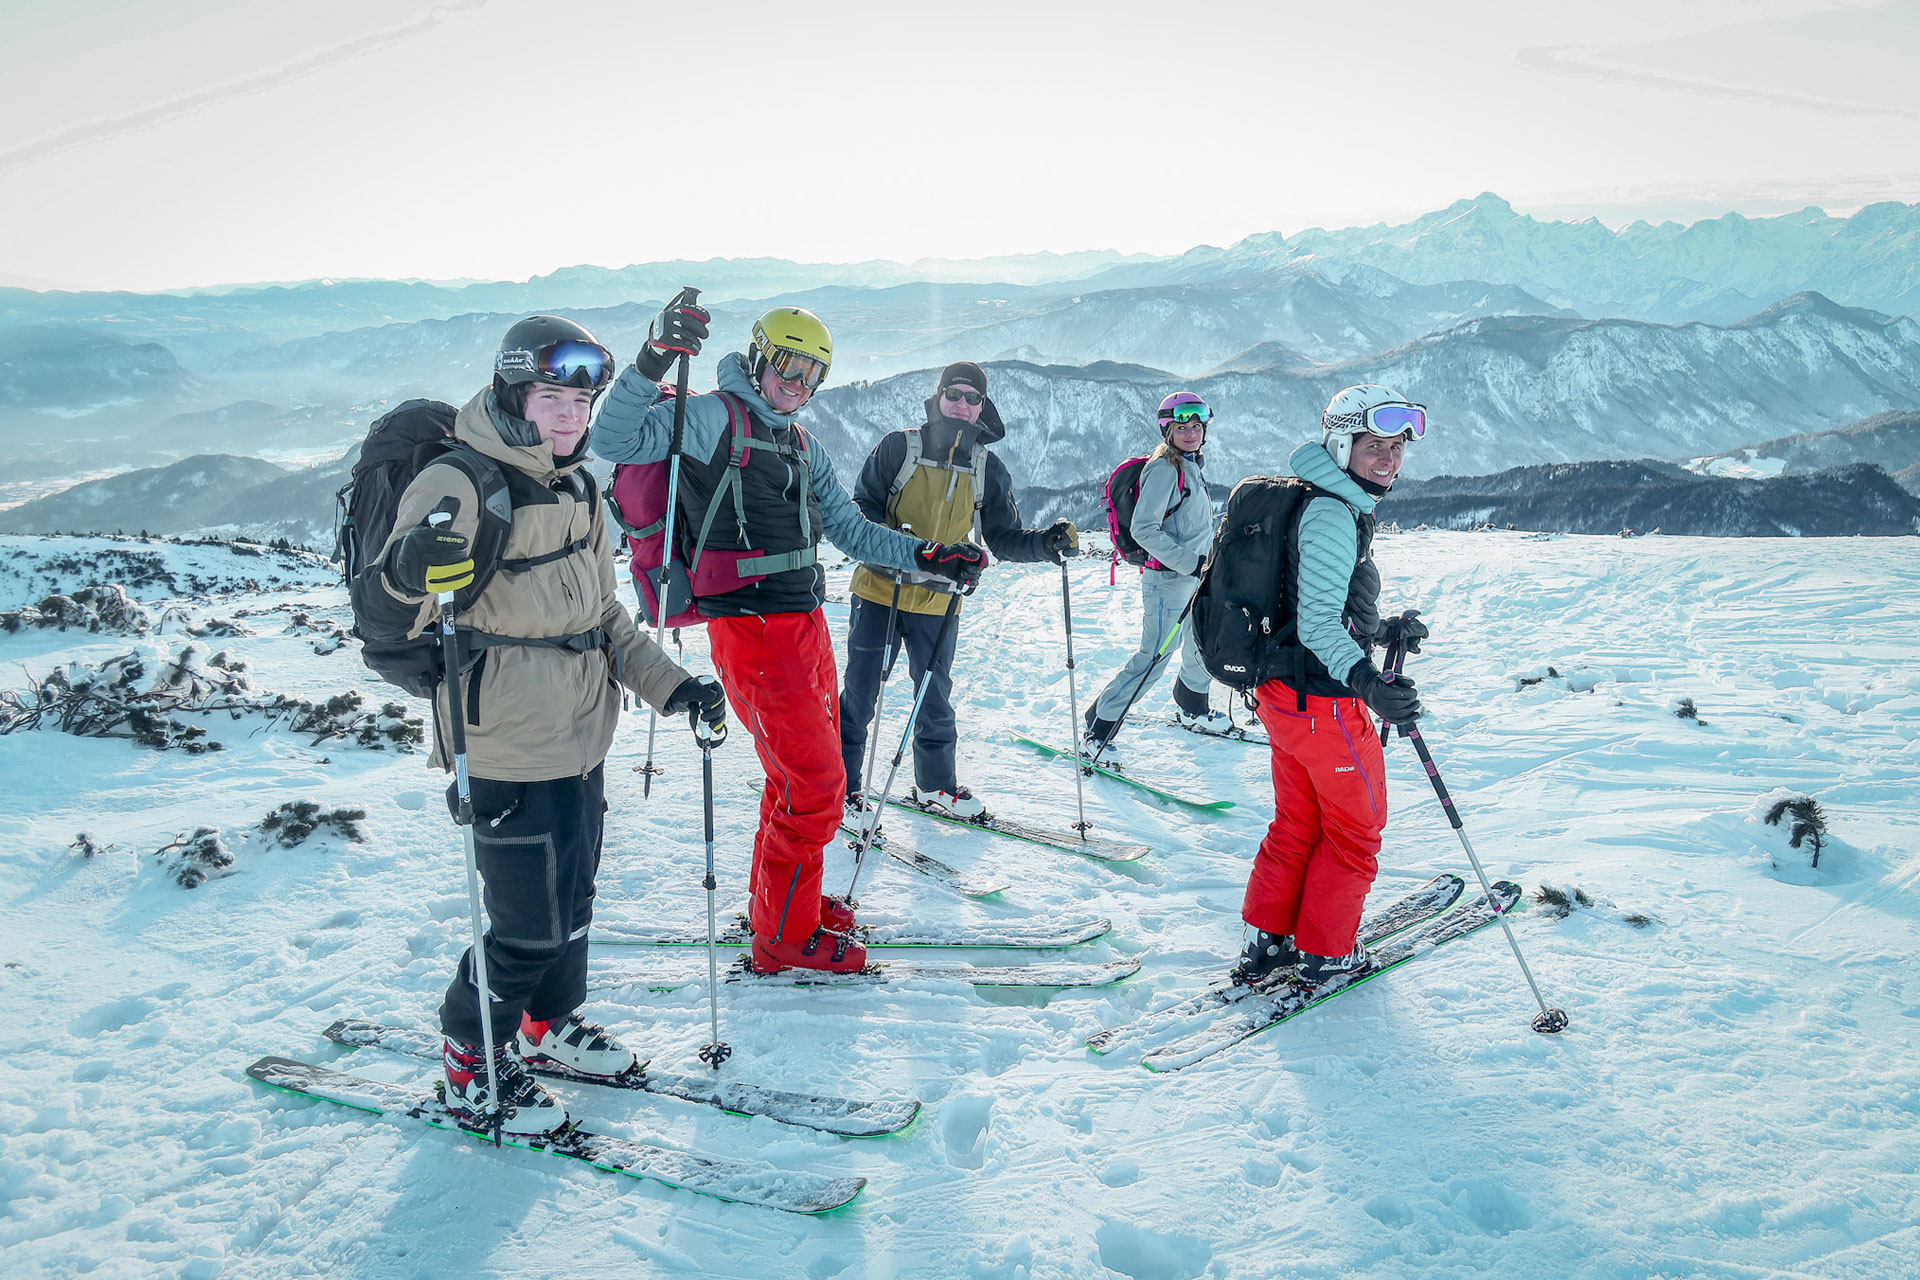 During one day ski touring workshop we will ascent one of the near by peaks.